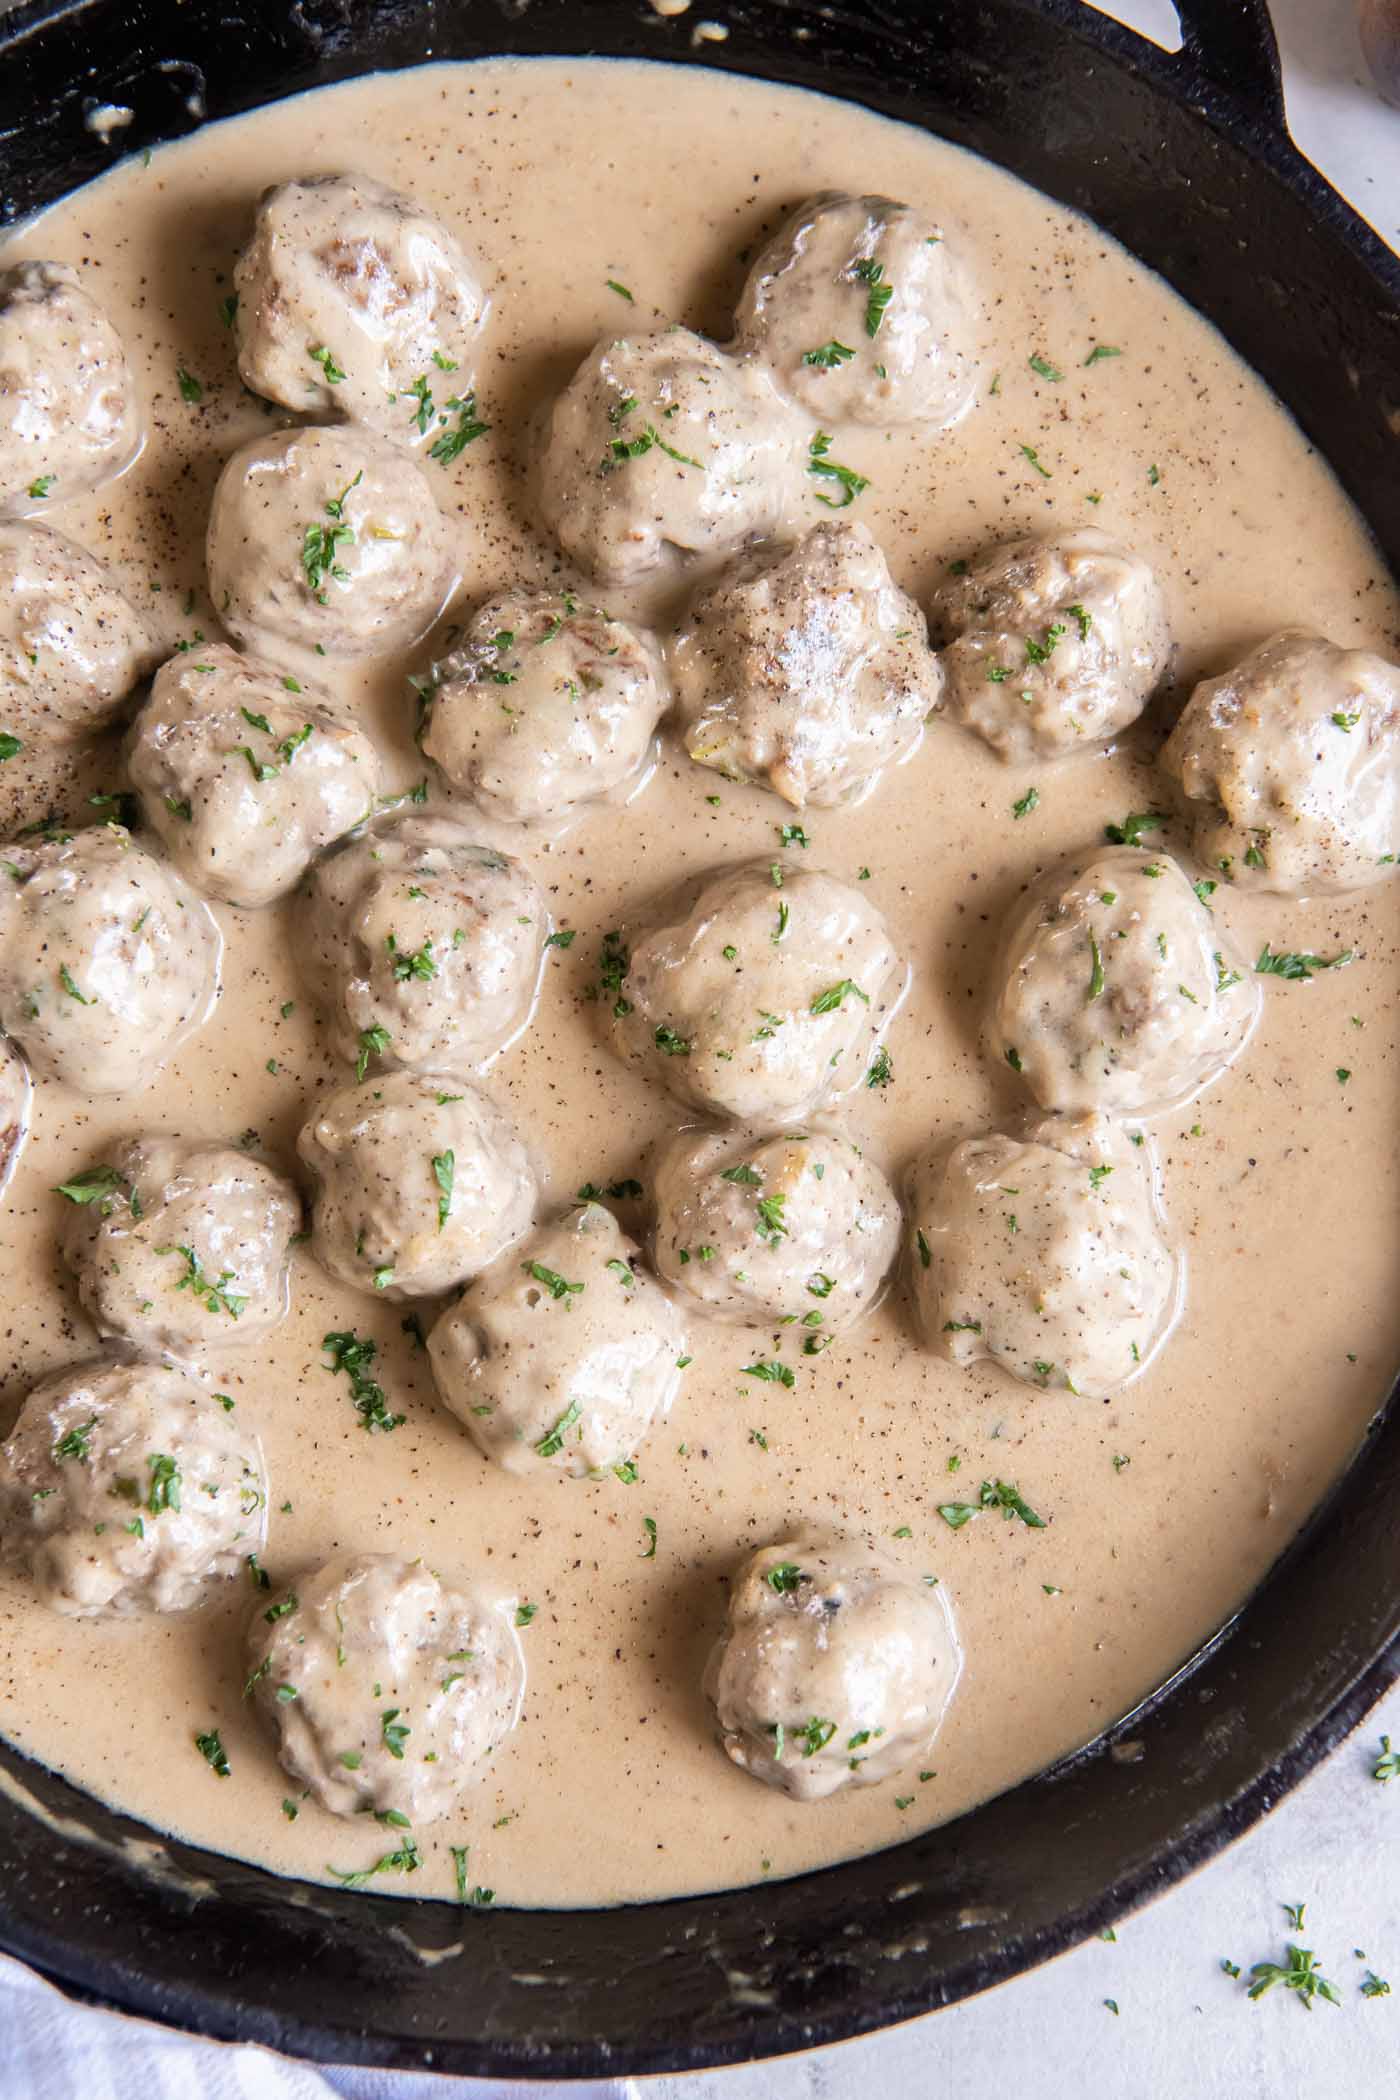 Swedish meatballs and gravy in a cast iron skillet.